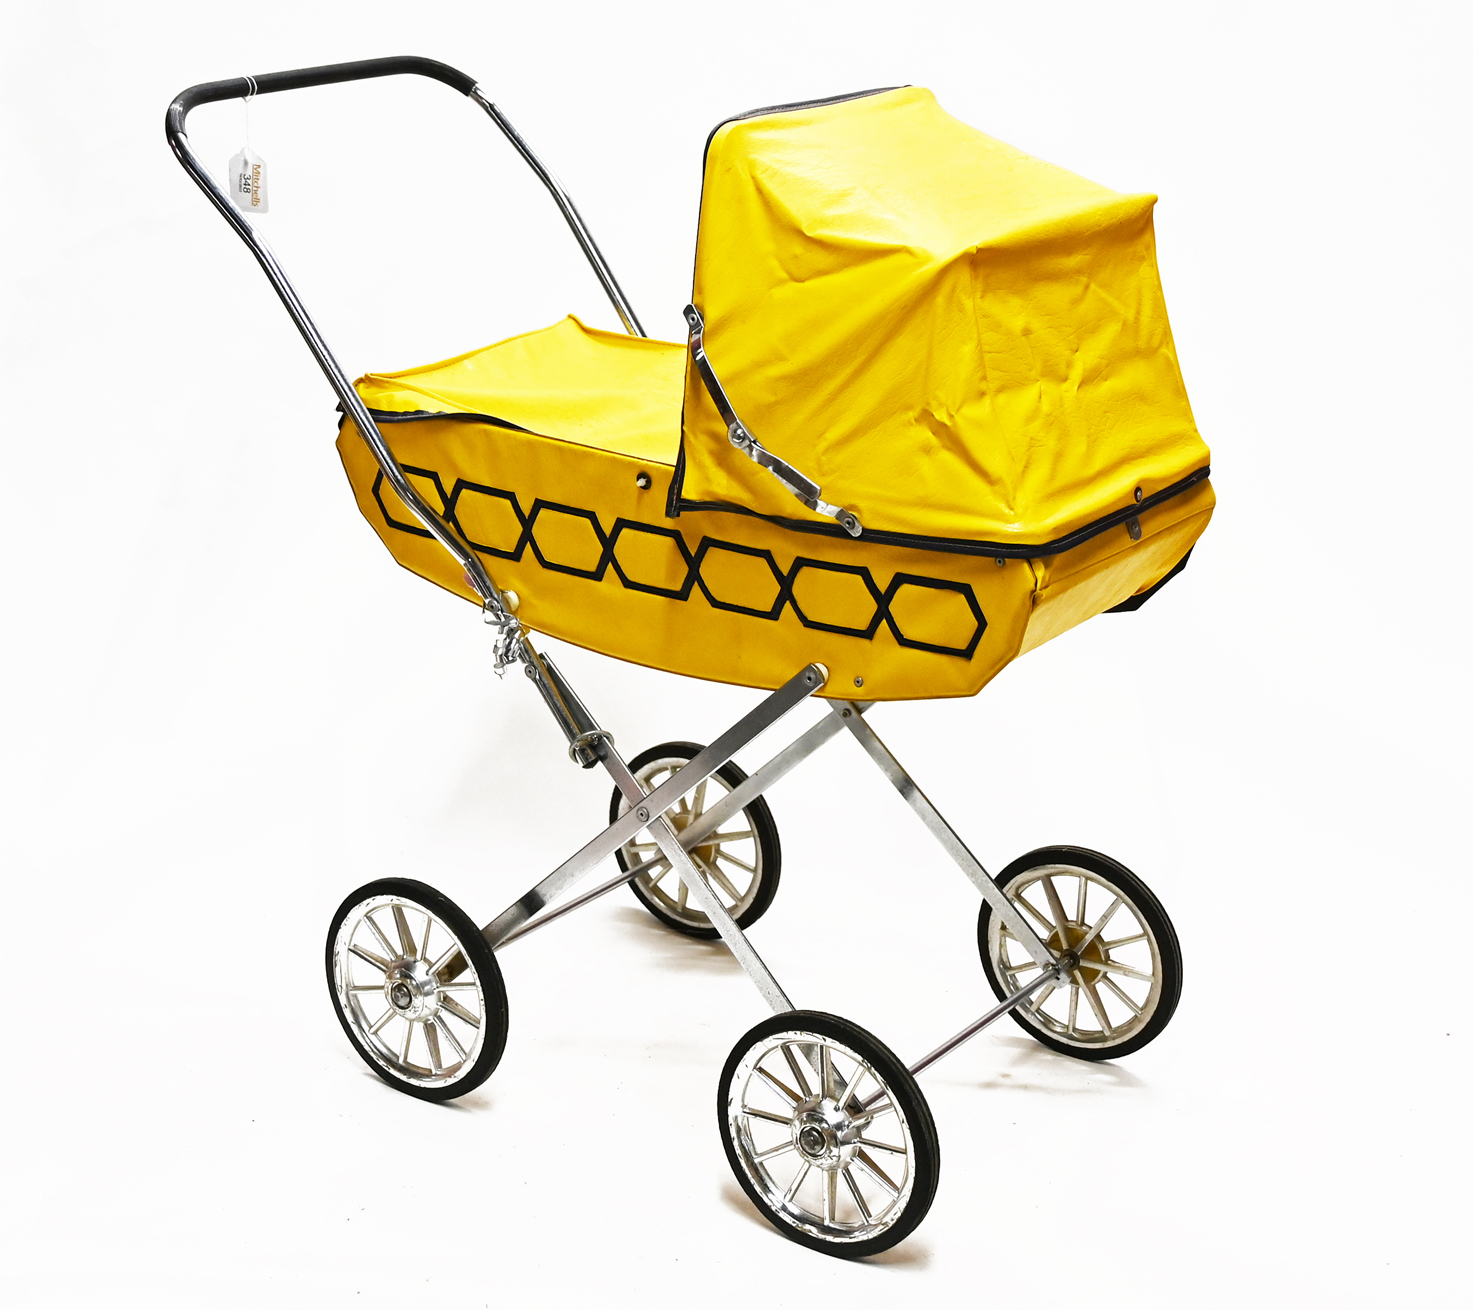 A vintage child's toy pram with yellow body